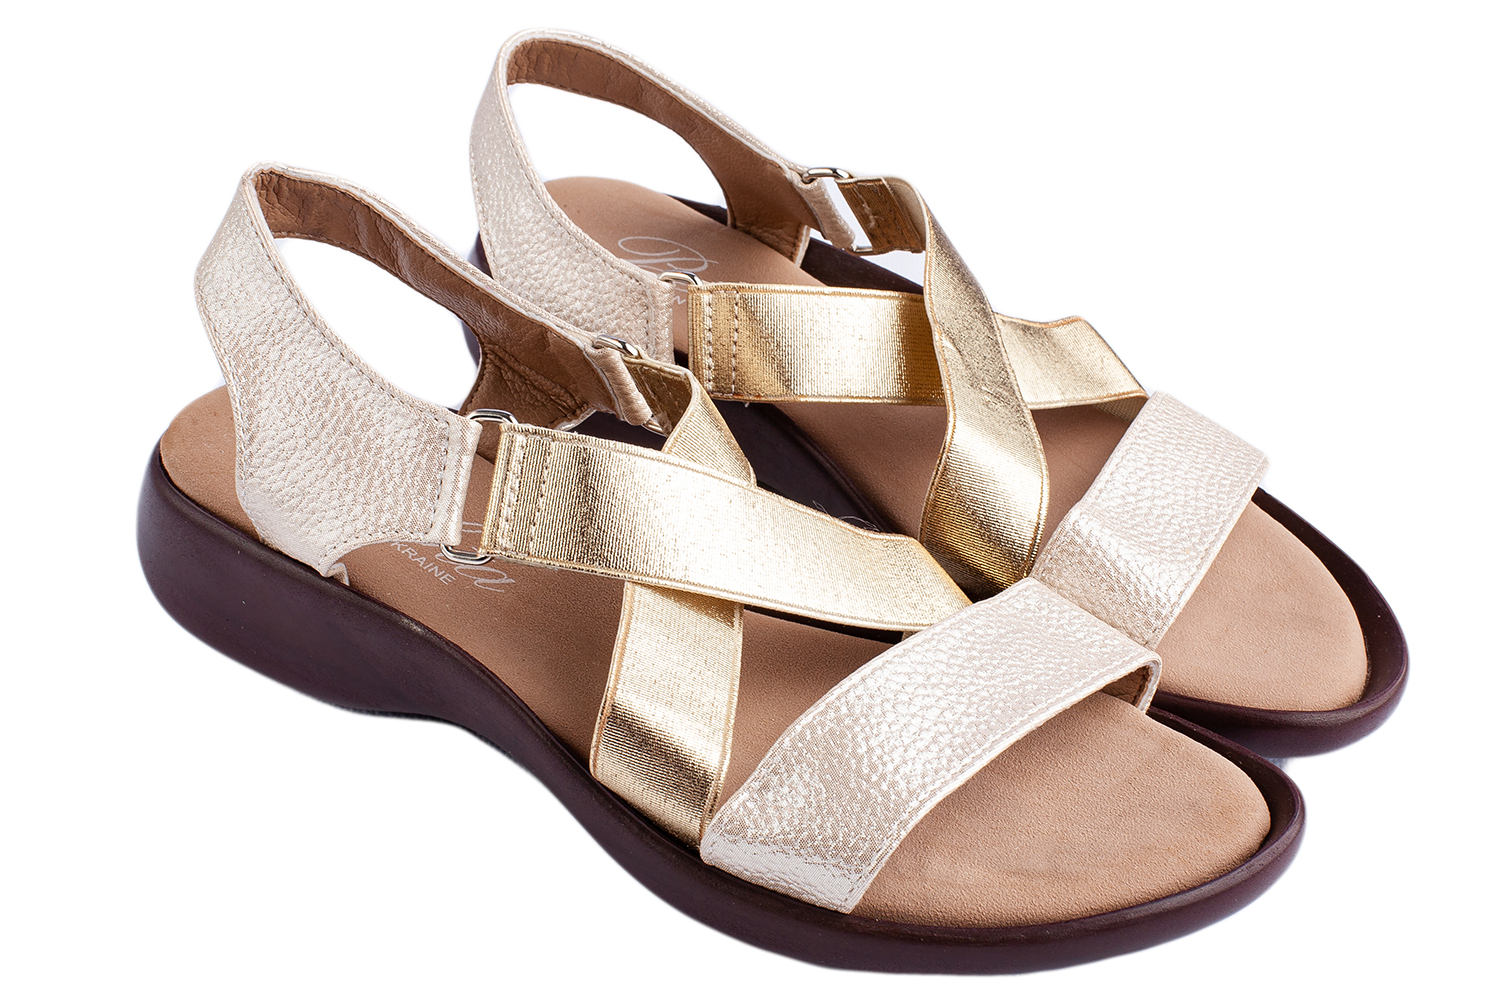 Women's sandals with an elastic by BELSTA - 1